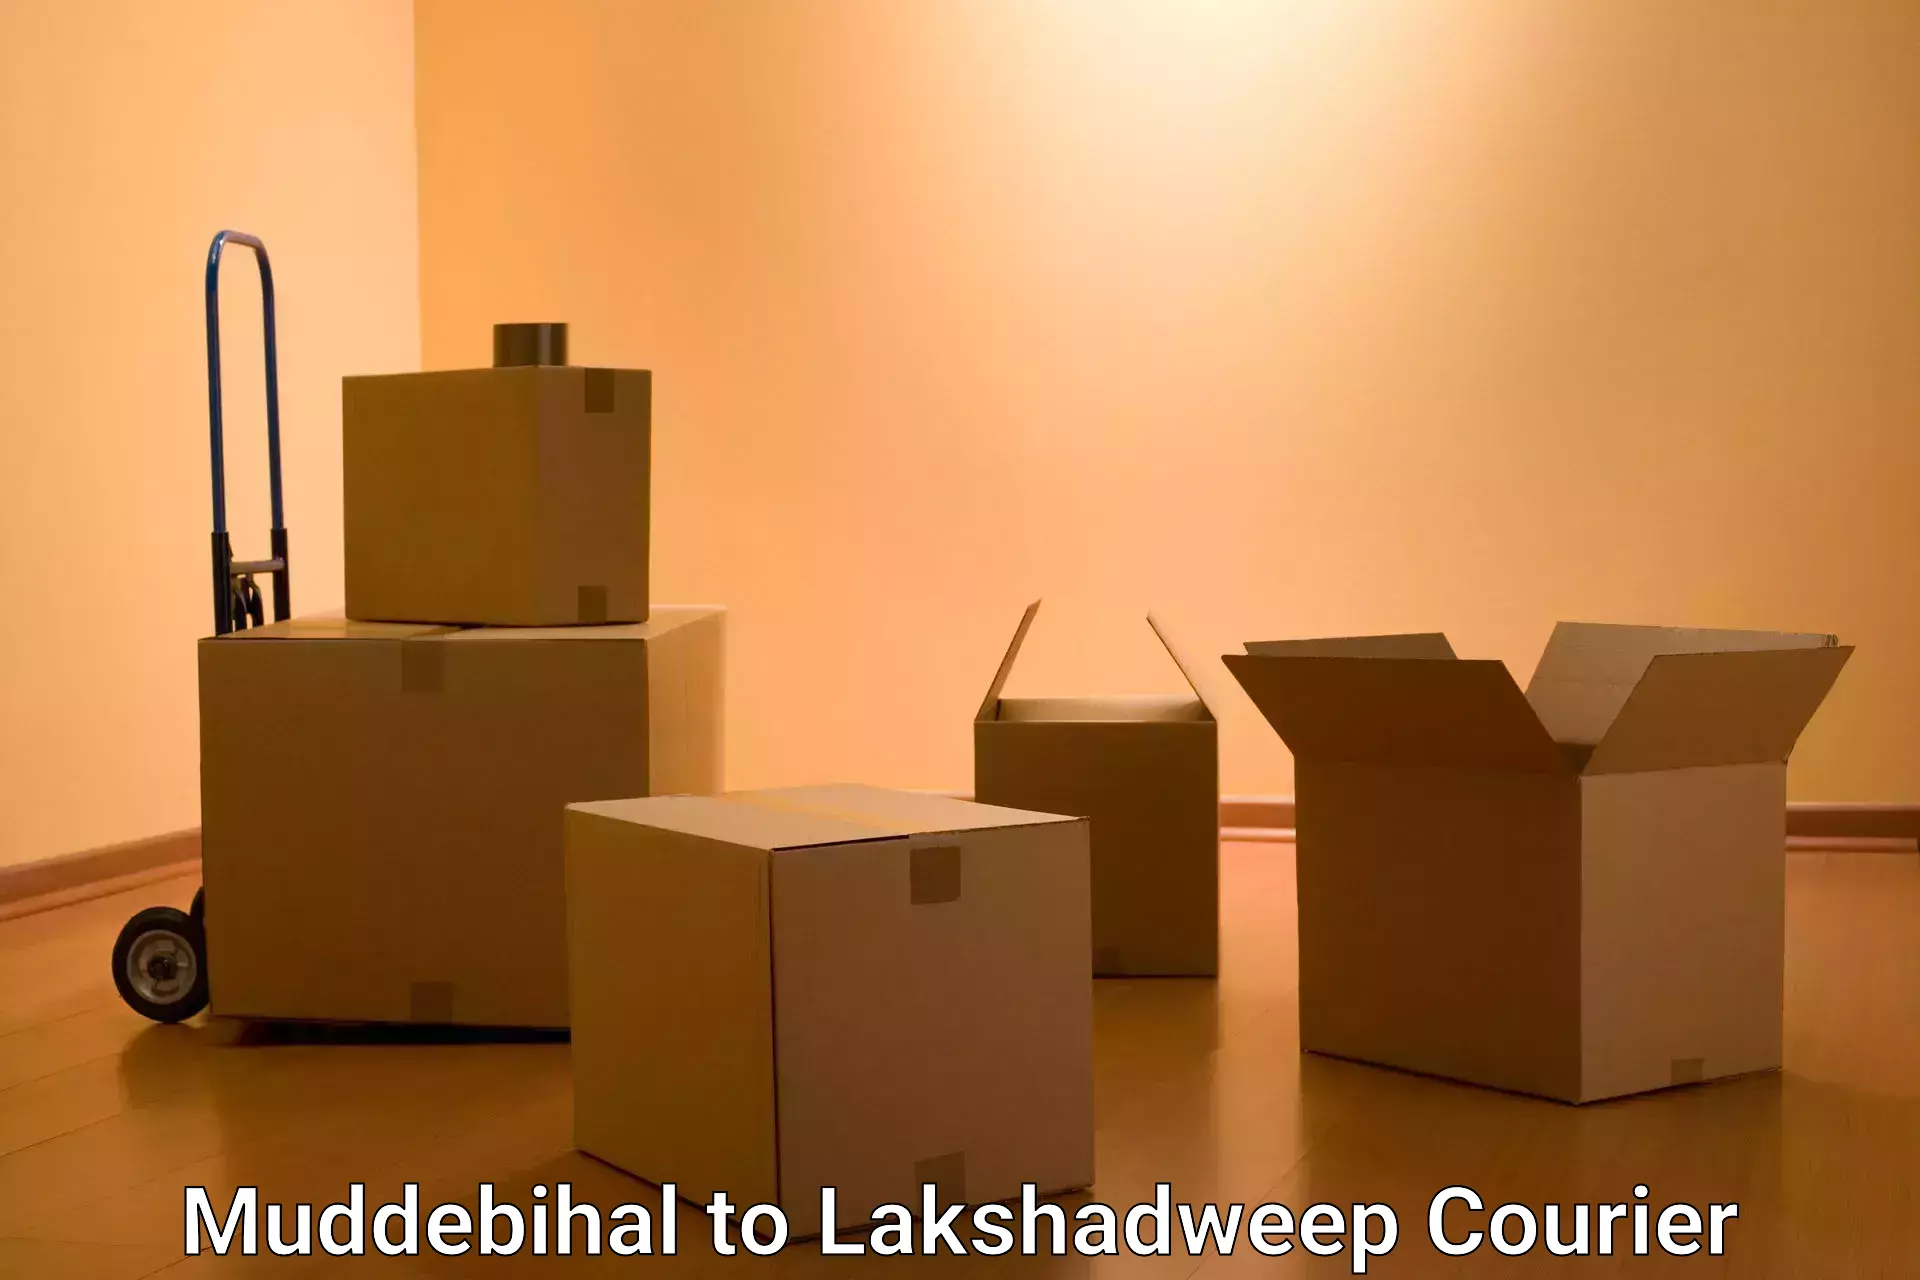 Customizable delivery plans Muddebihal to Lakshadweep